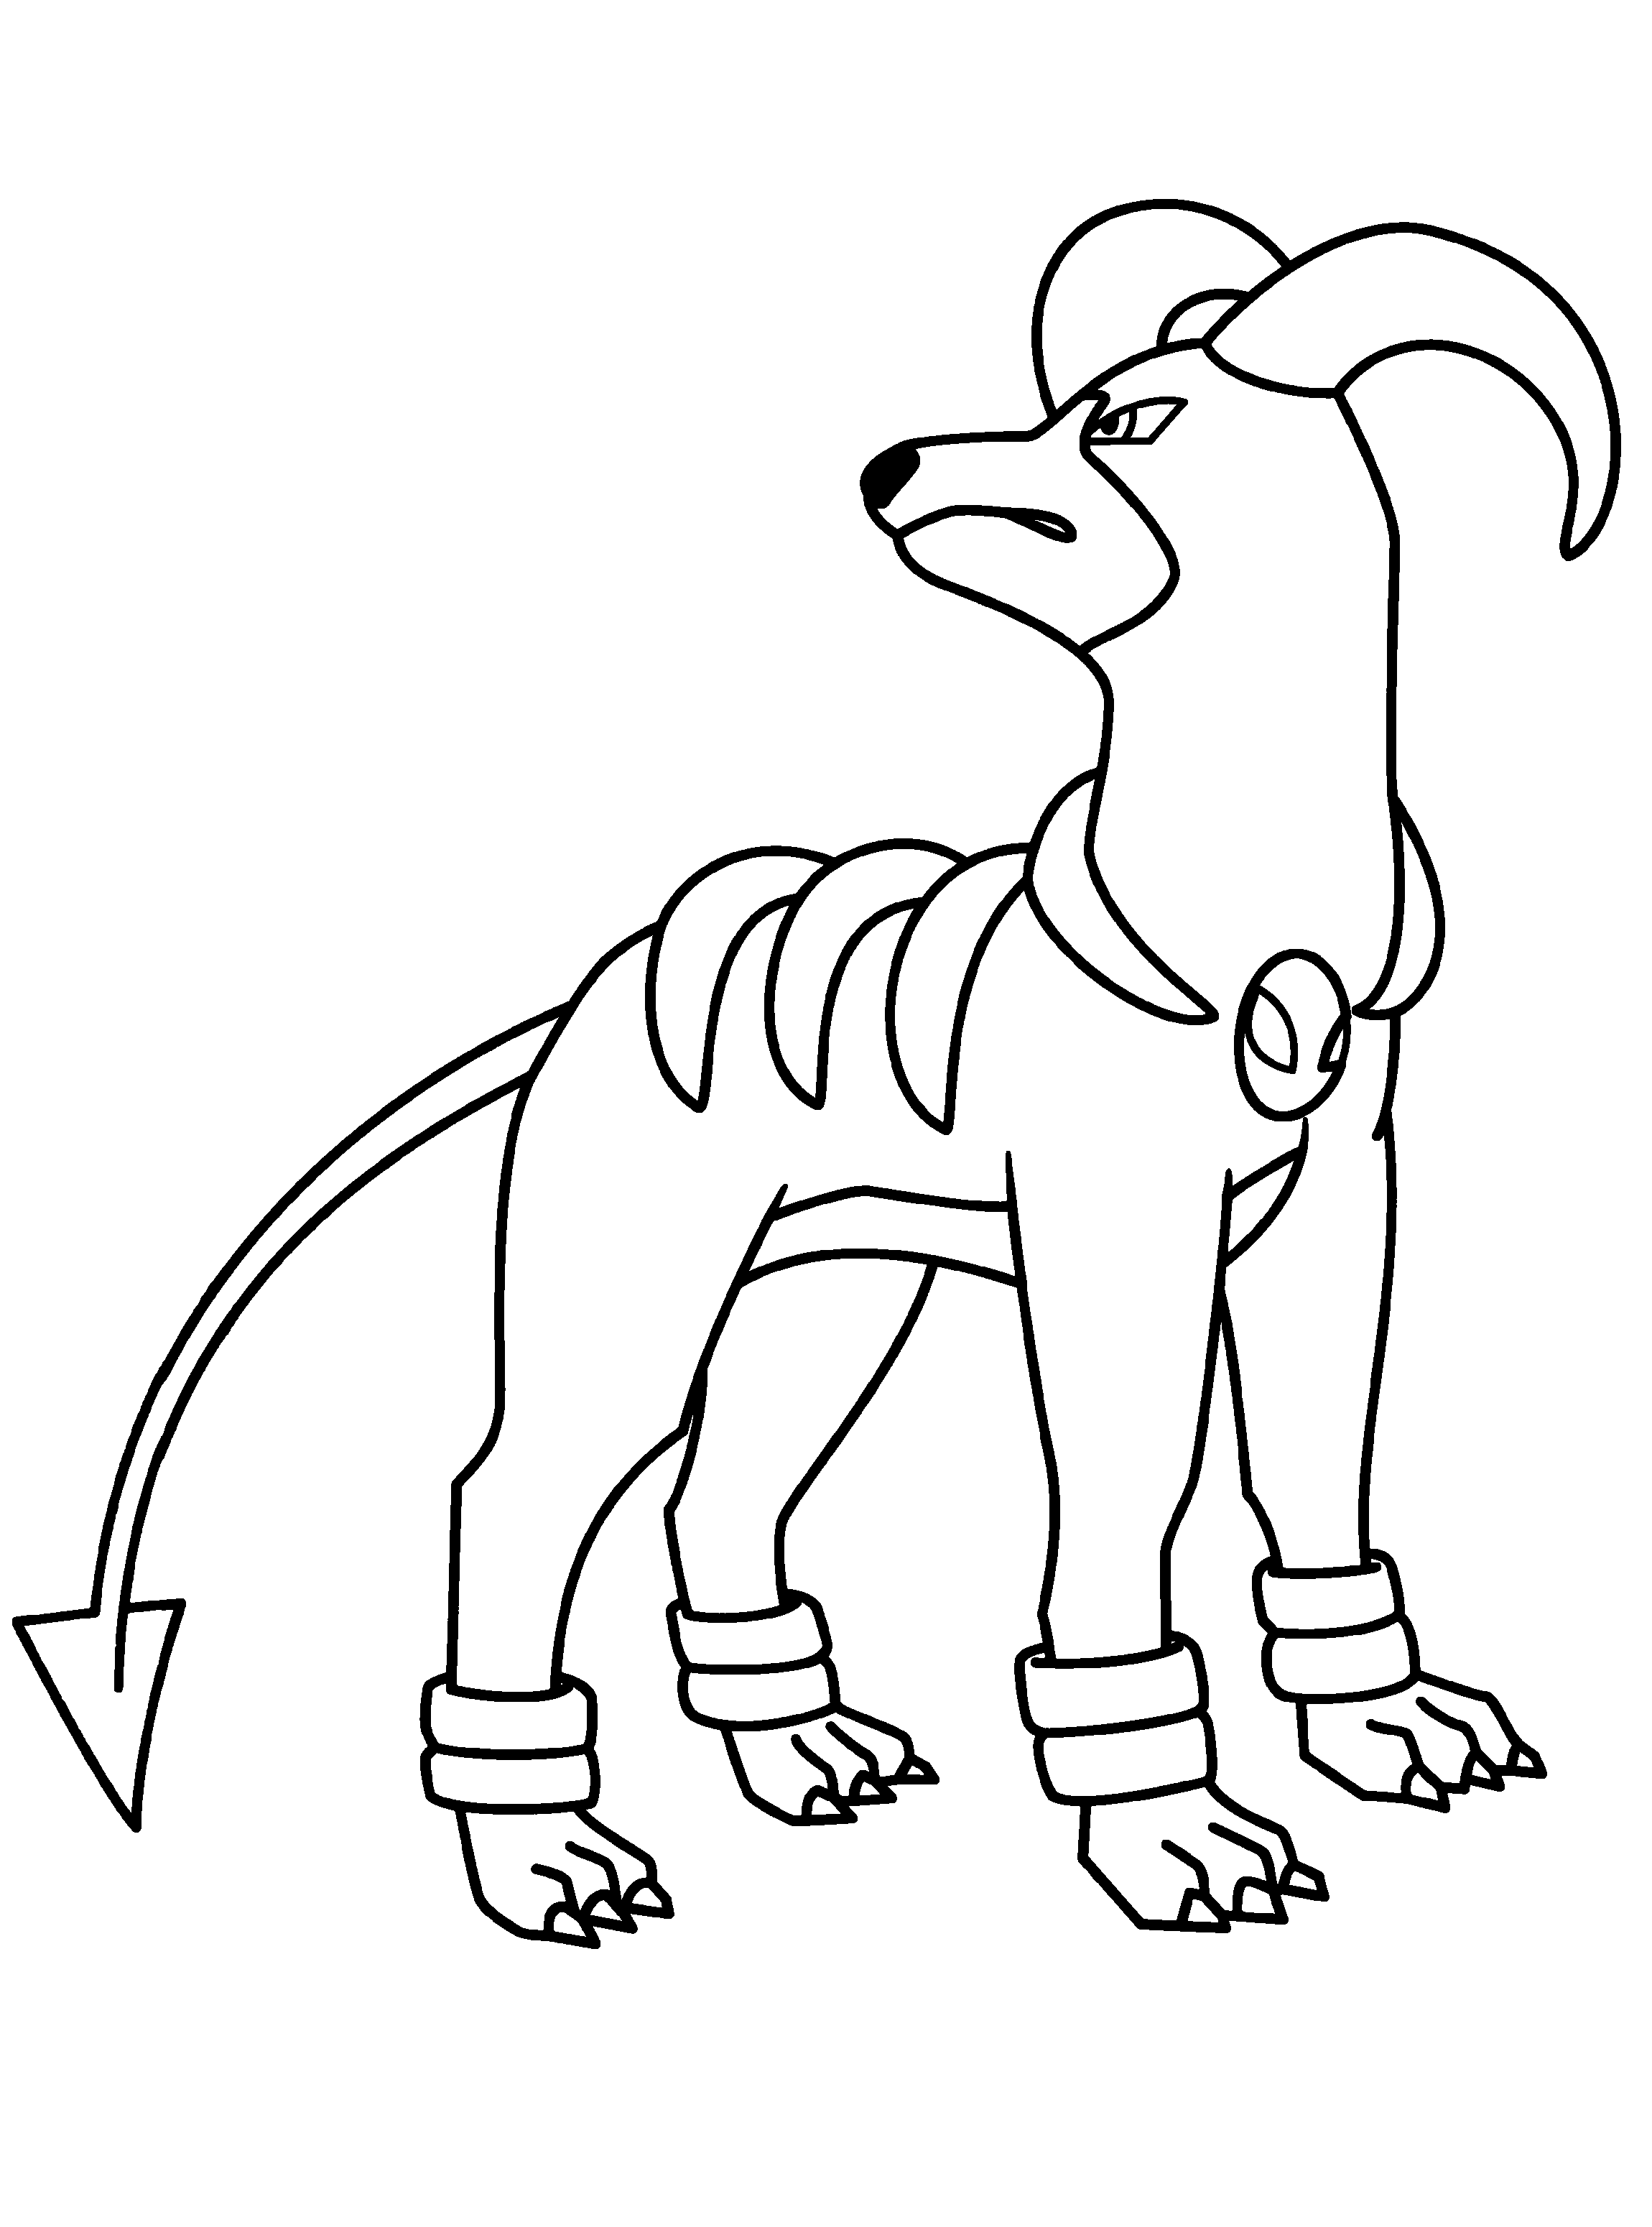 Pokemon Coloring Pages (15) Coloring Kids - Coloring Kids